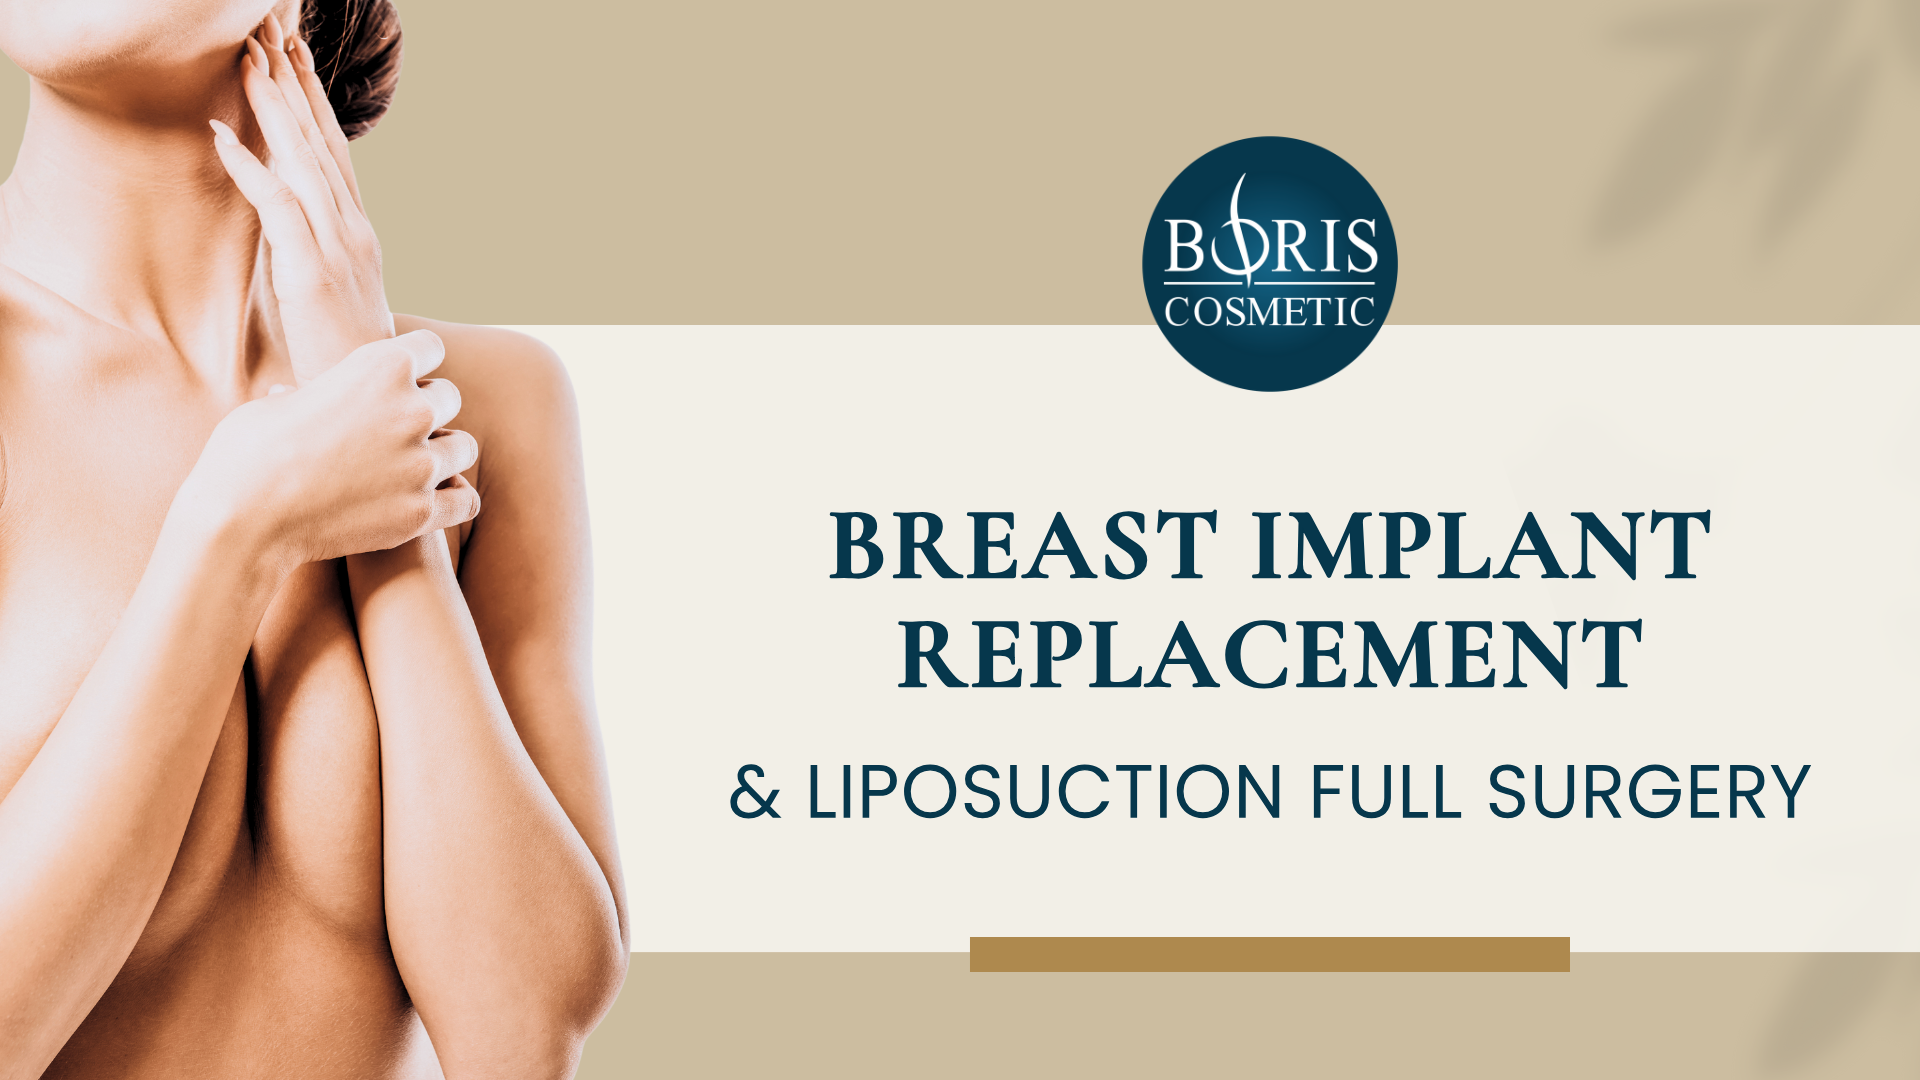 Breast Implant Replacement and Liposuction Full Surgery at Boris Cosmetic